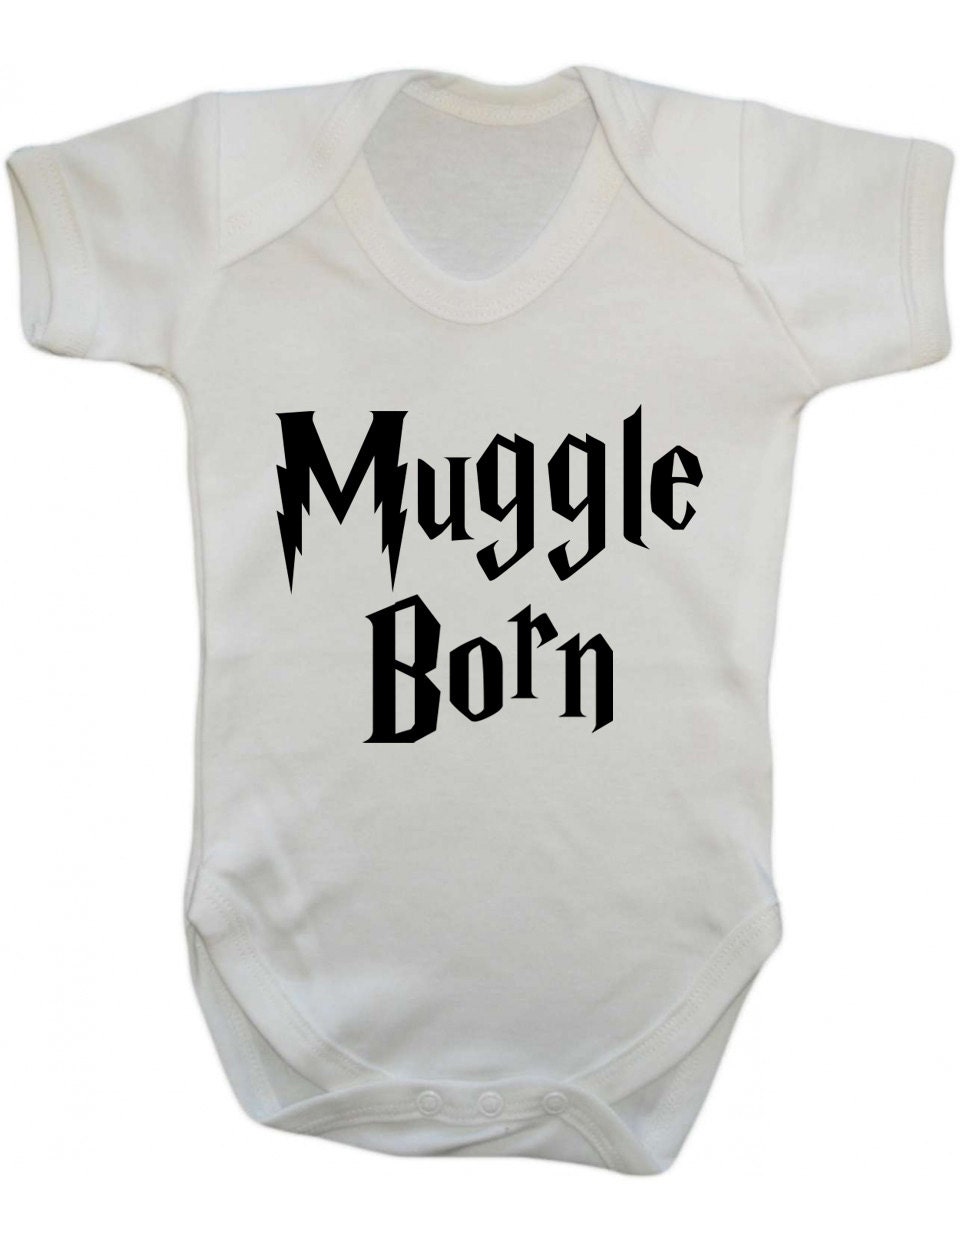 Baby Play suit Muggle Born Harry Potter